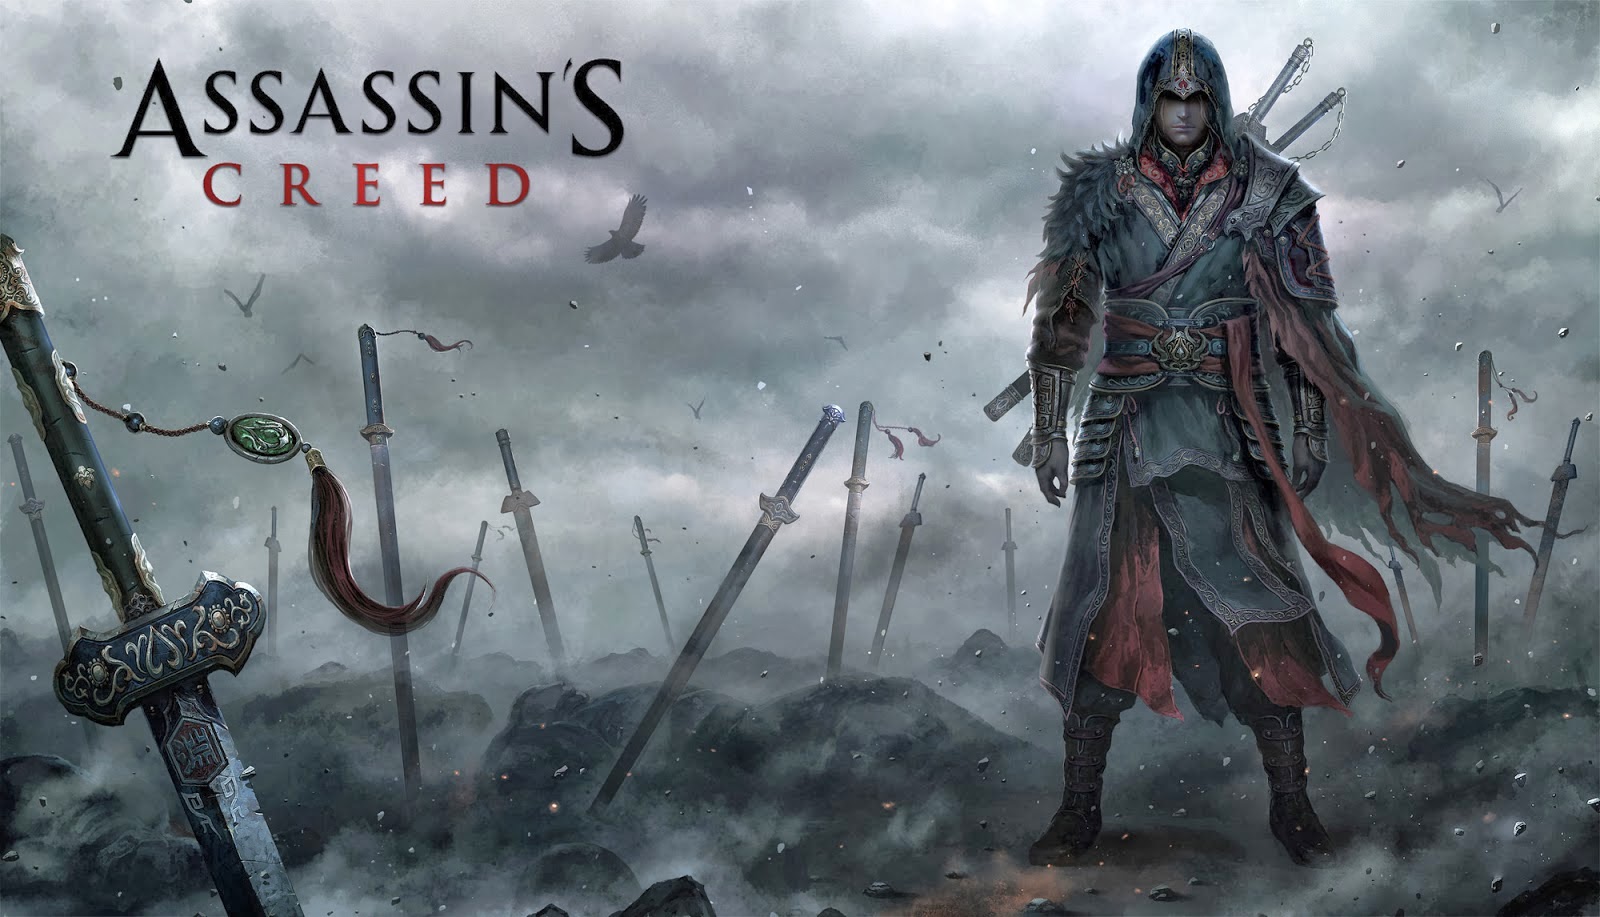 Assassins Creed IV Black Flag free download full pc game